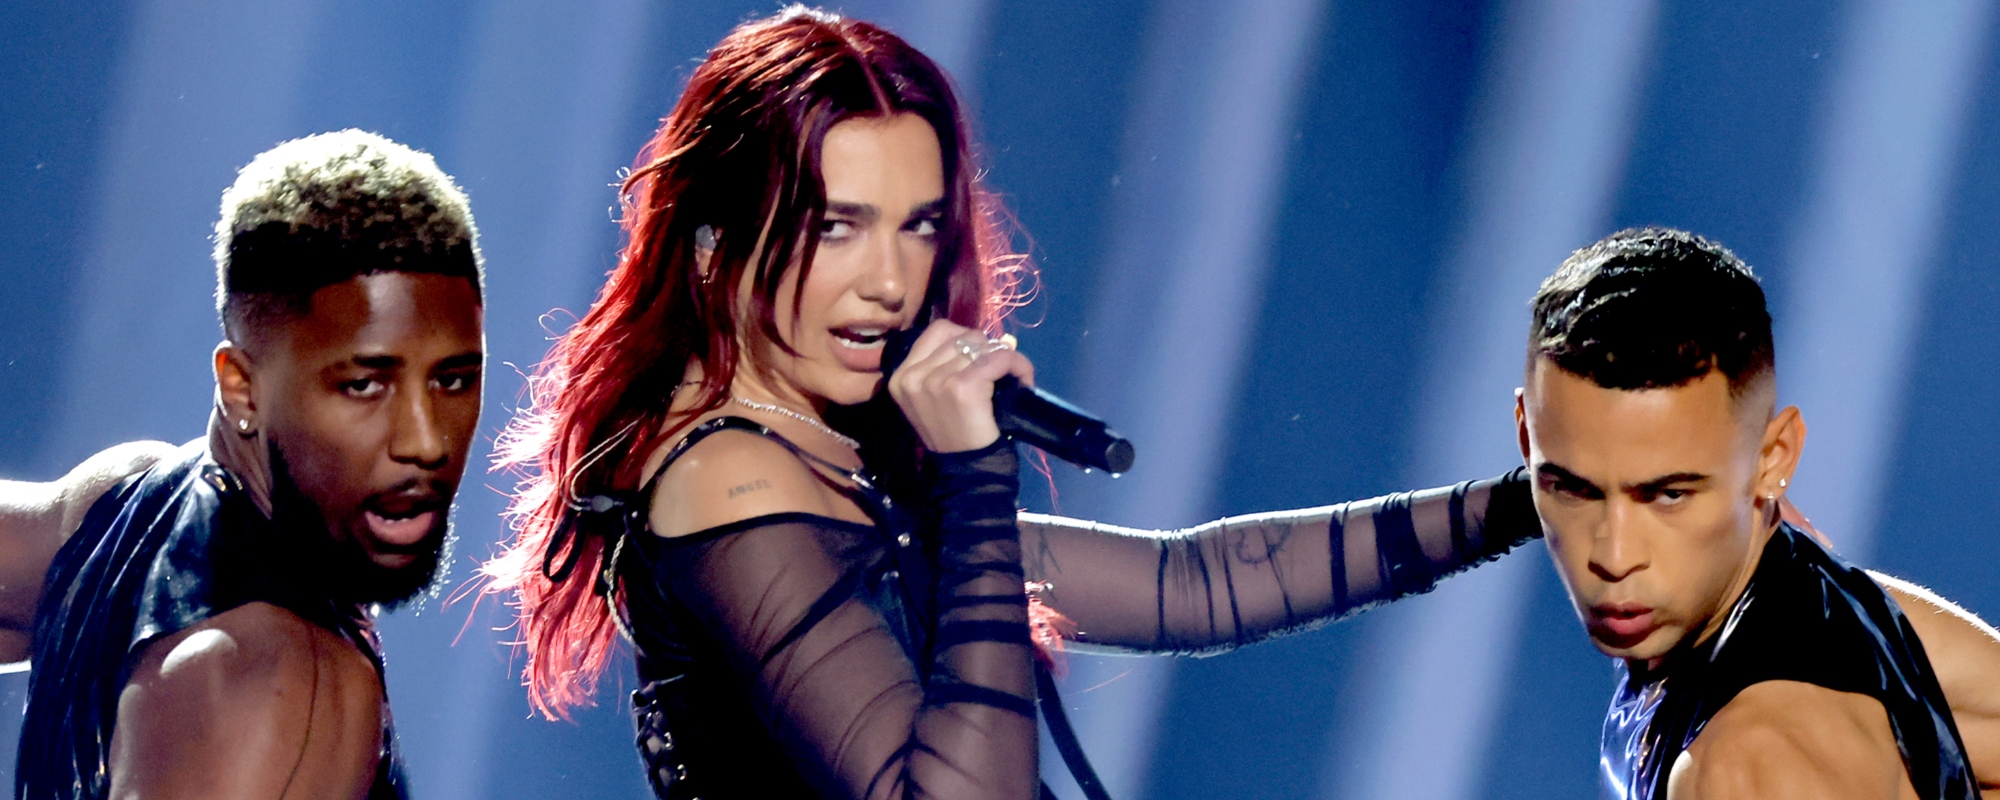 Watch Dua Lipa Get “Intense, Strong, & Dancey” With Jaw-Dropping GRAMMY Performance